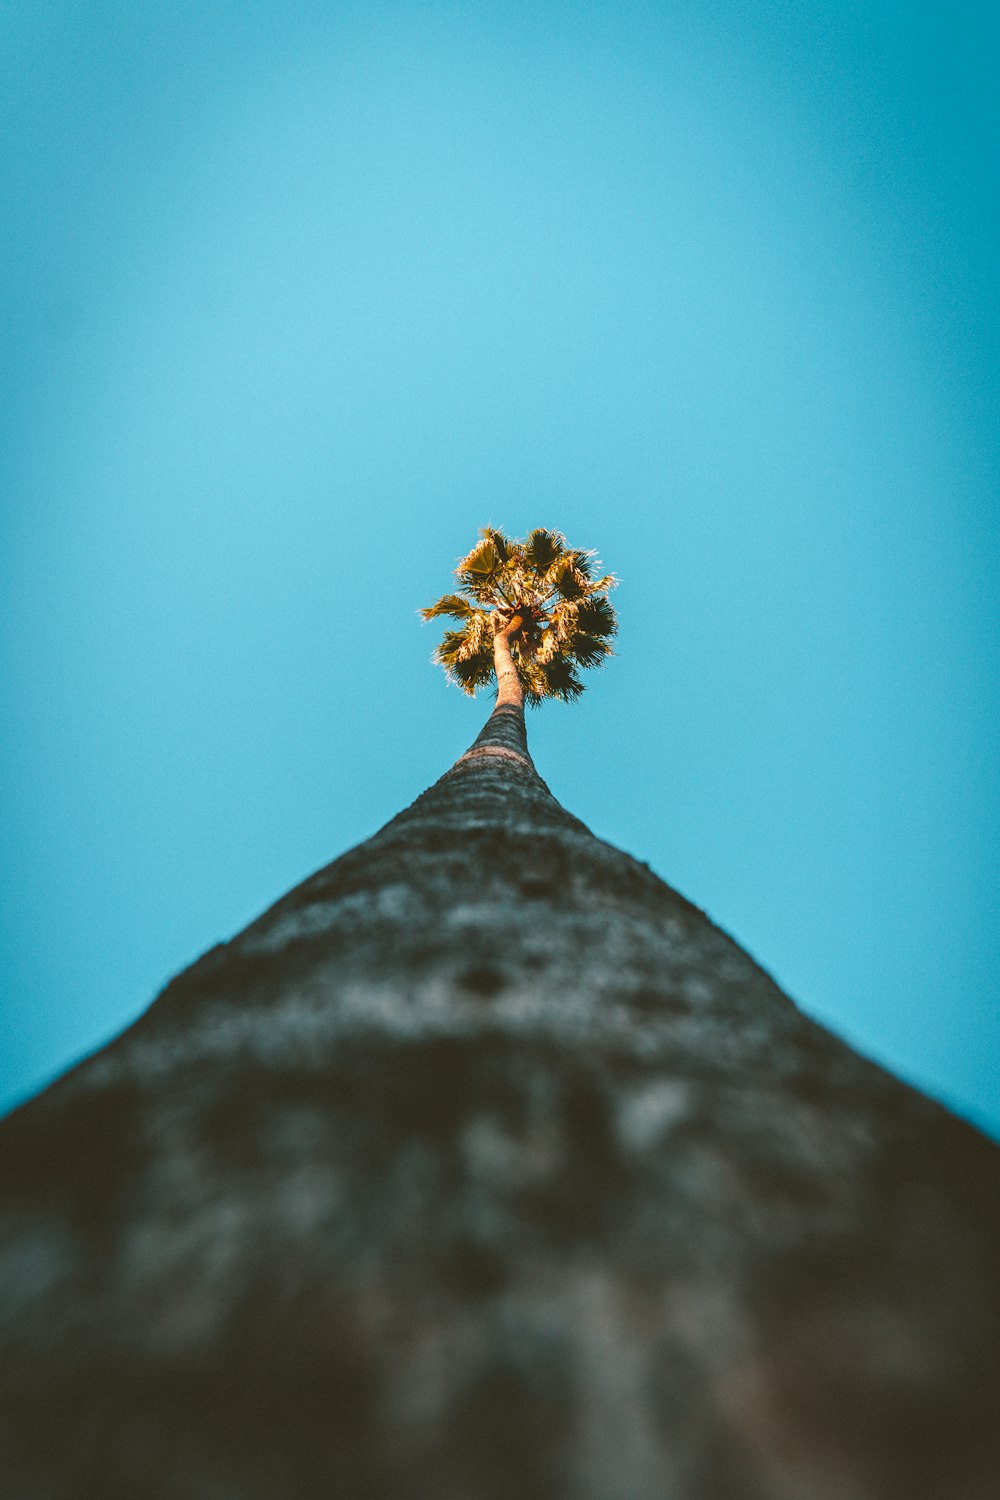 a small tree on top of a tall building